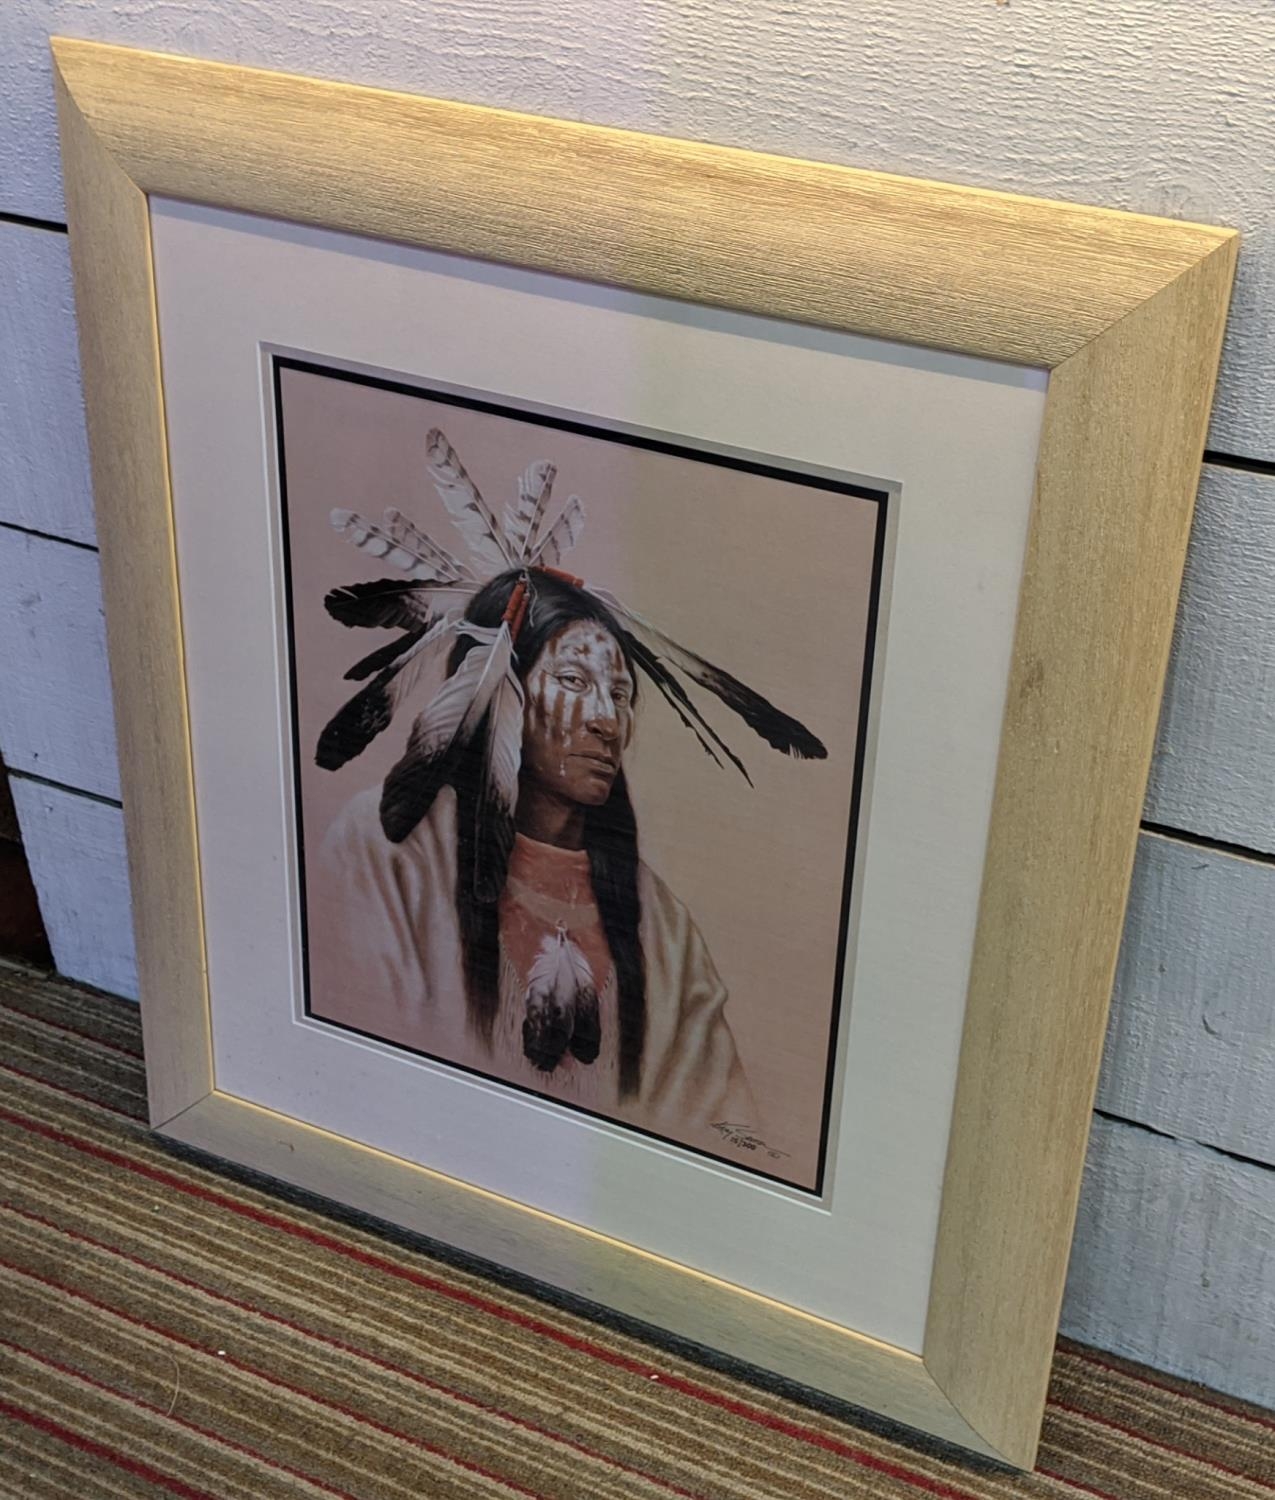 KIRBY SATTLER, 'Native American', giclée print, 45cm x 39cm, 15/300, signed and framed. - Image 2 of 6